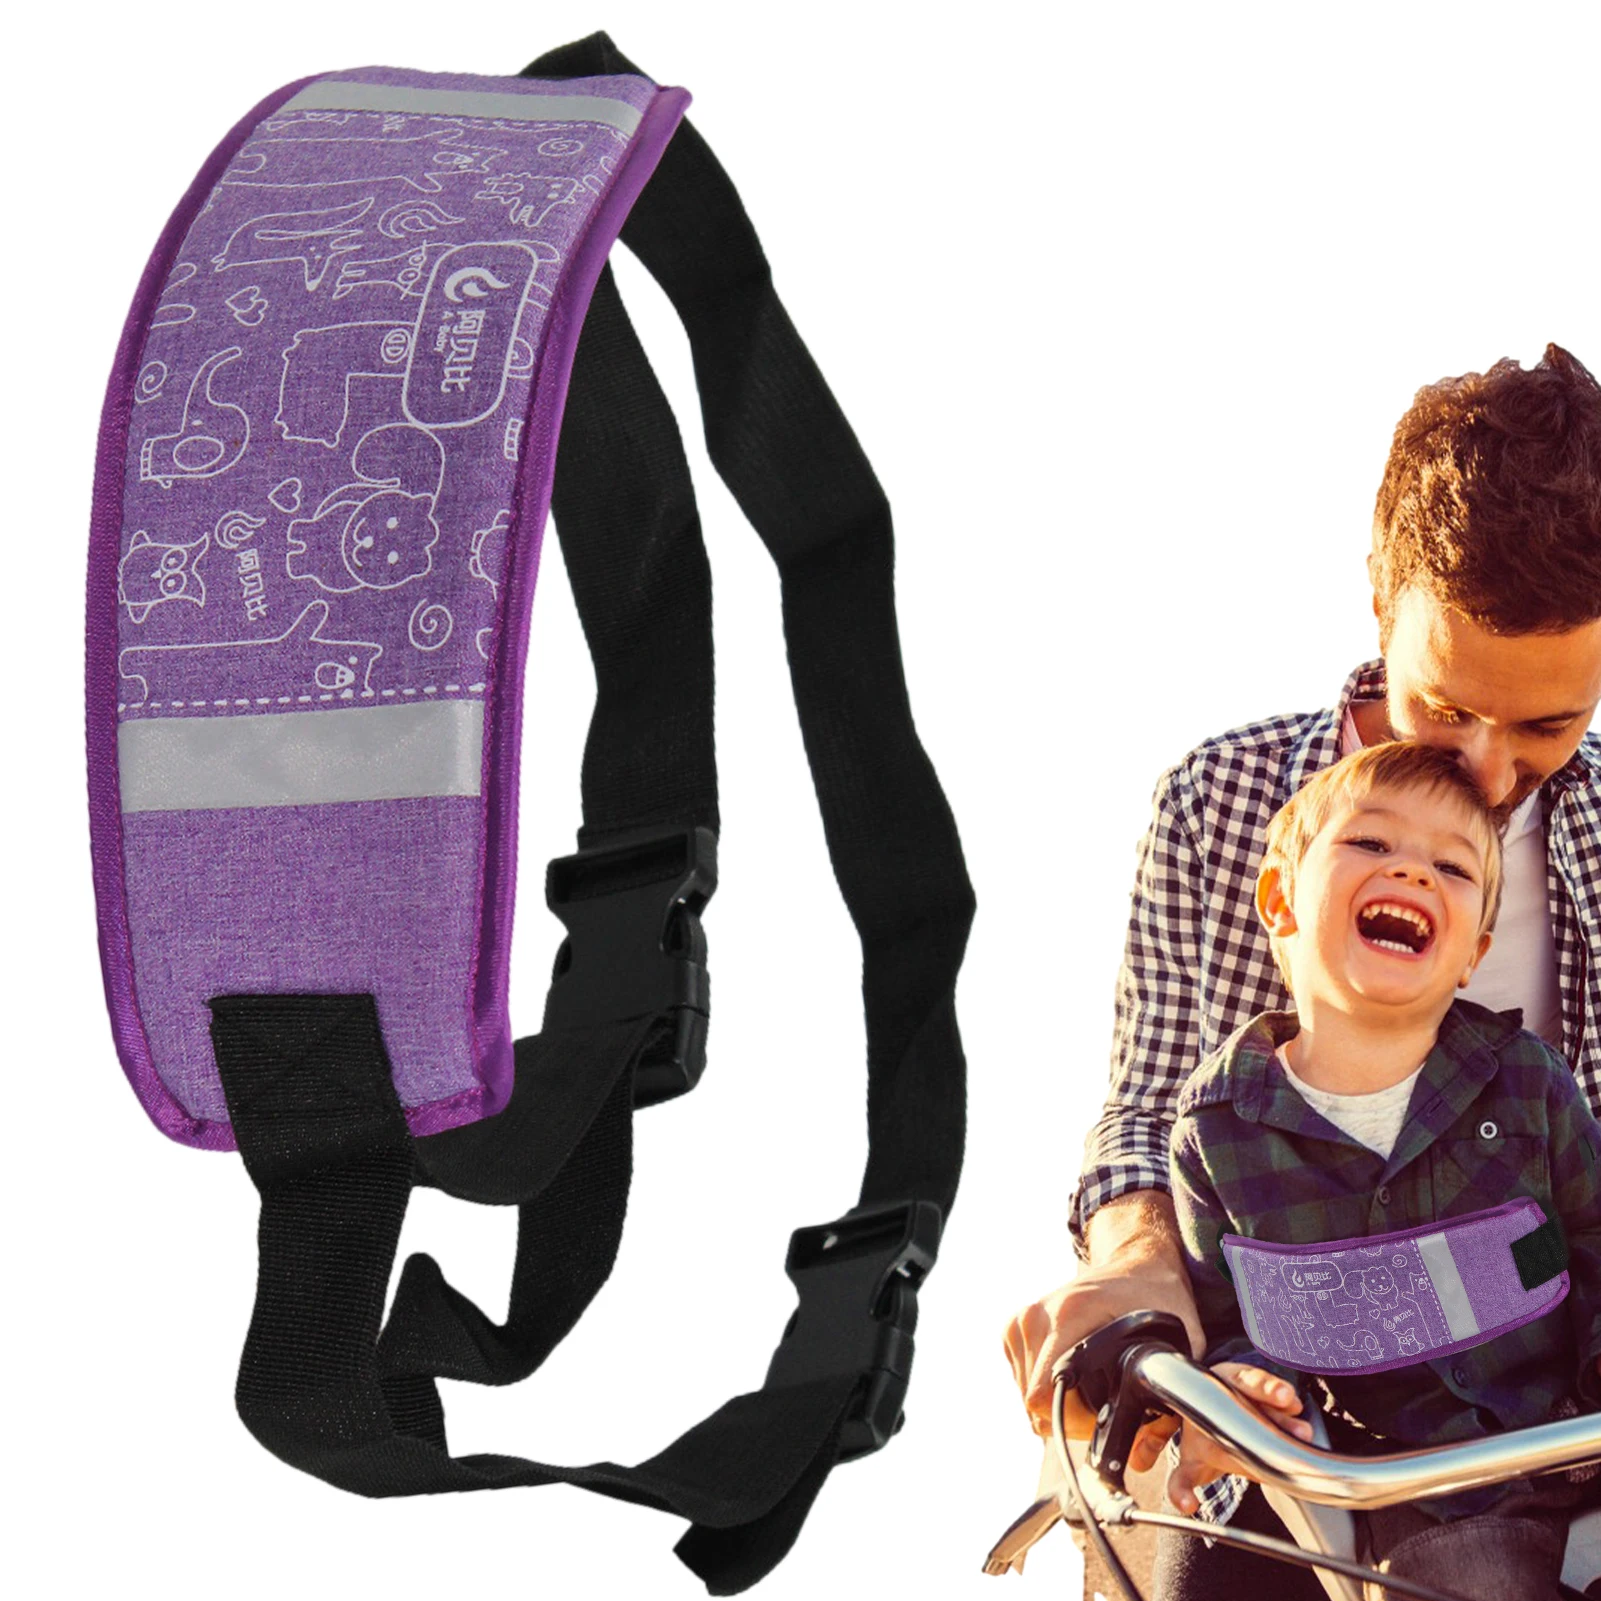 Kids Motorcycle Harness Breathable Motorcycle Rear Seat Safety Belt Non-Slip Strap Motorcycle Seat Strap For Kids Reflective